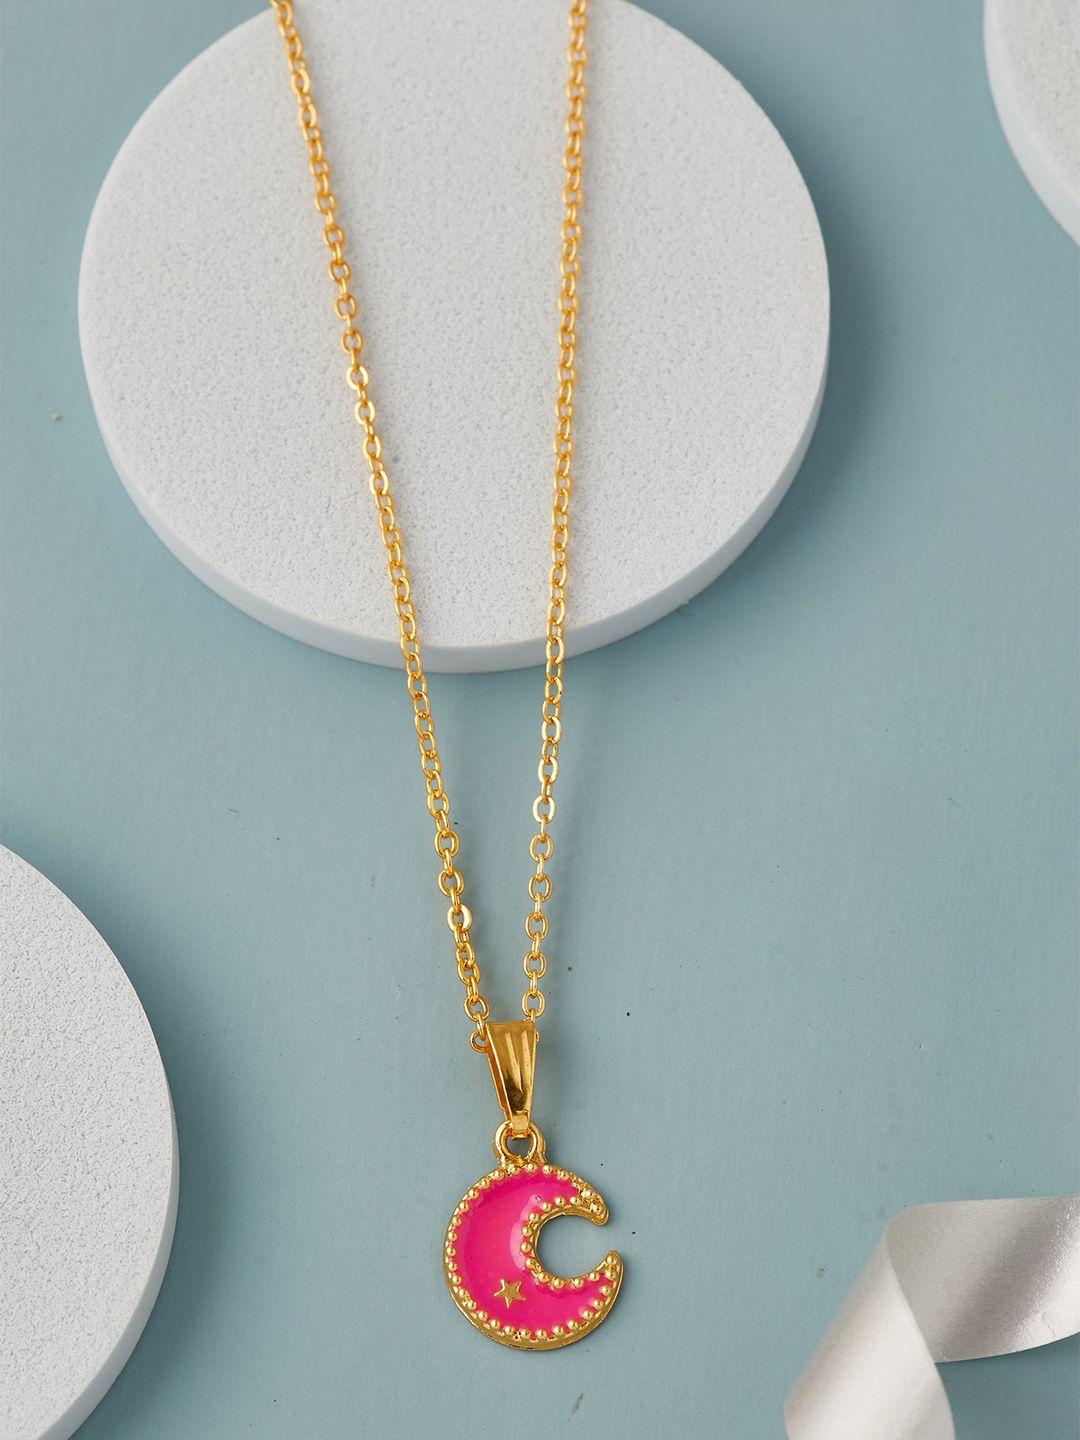 dressberry gold-plated crescent moon shaped pendant with chain